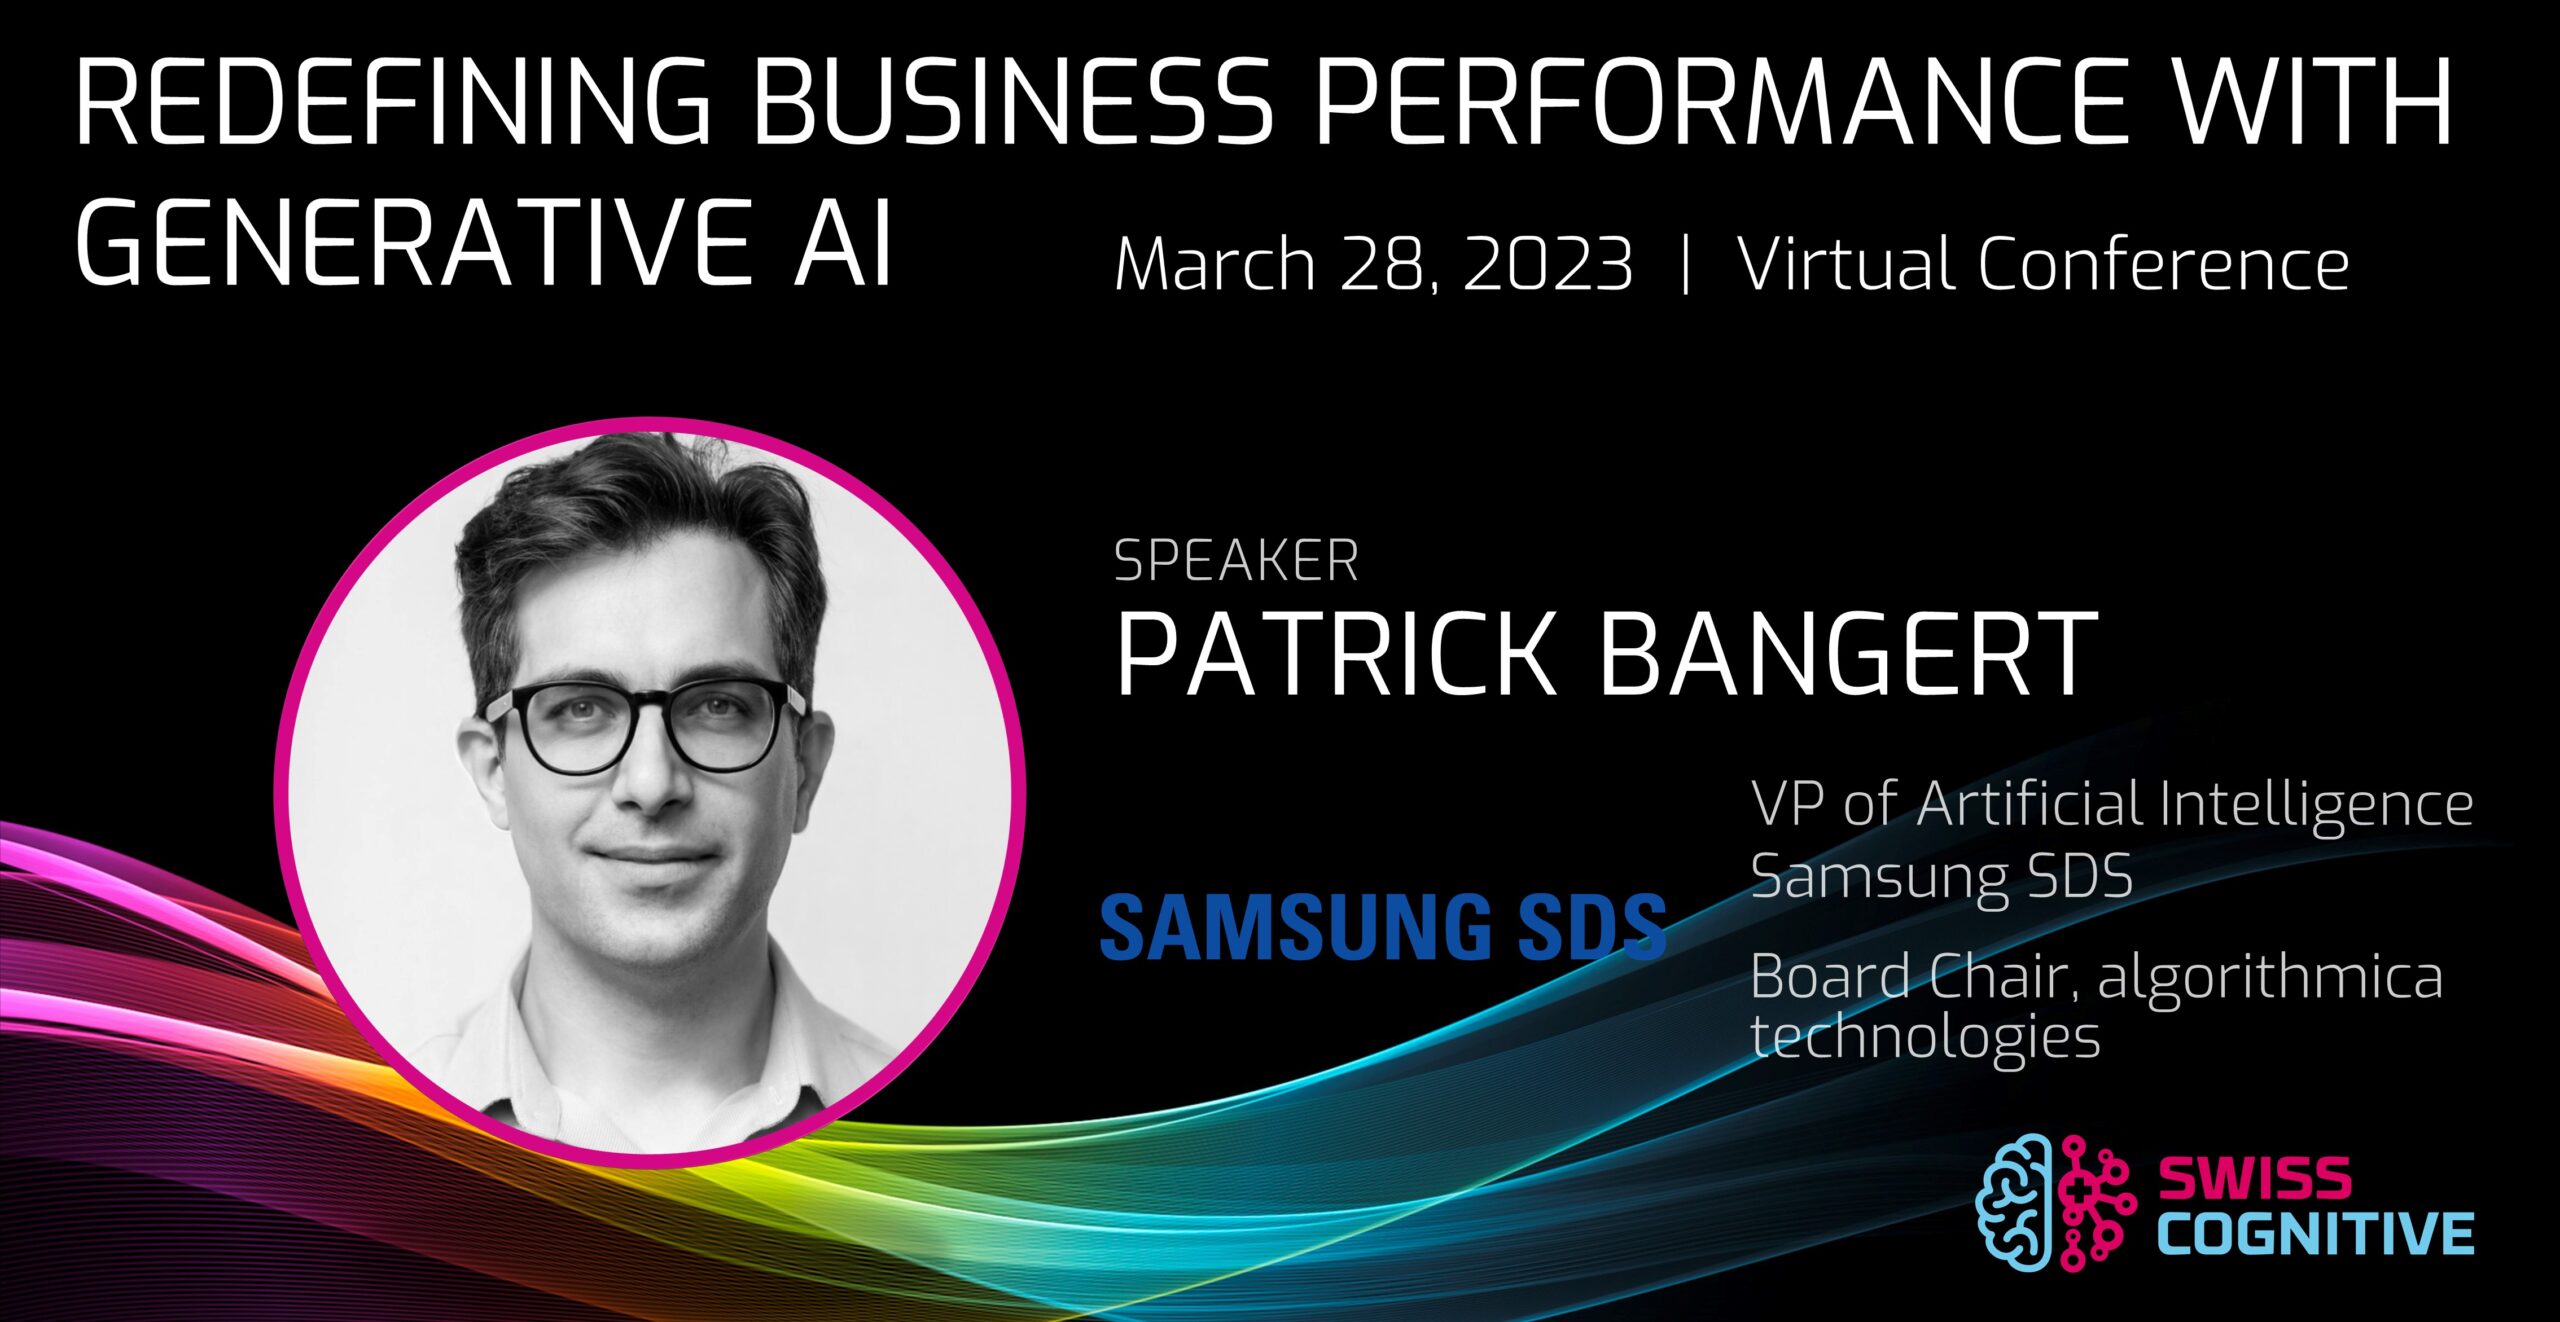 Patrick Bangert - Redefining Business Performance with Generative AI -SwissCognitive_World-Leading_AI_Network